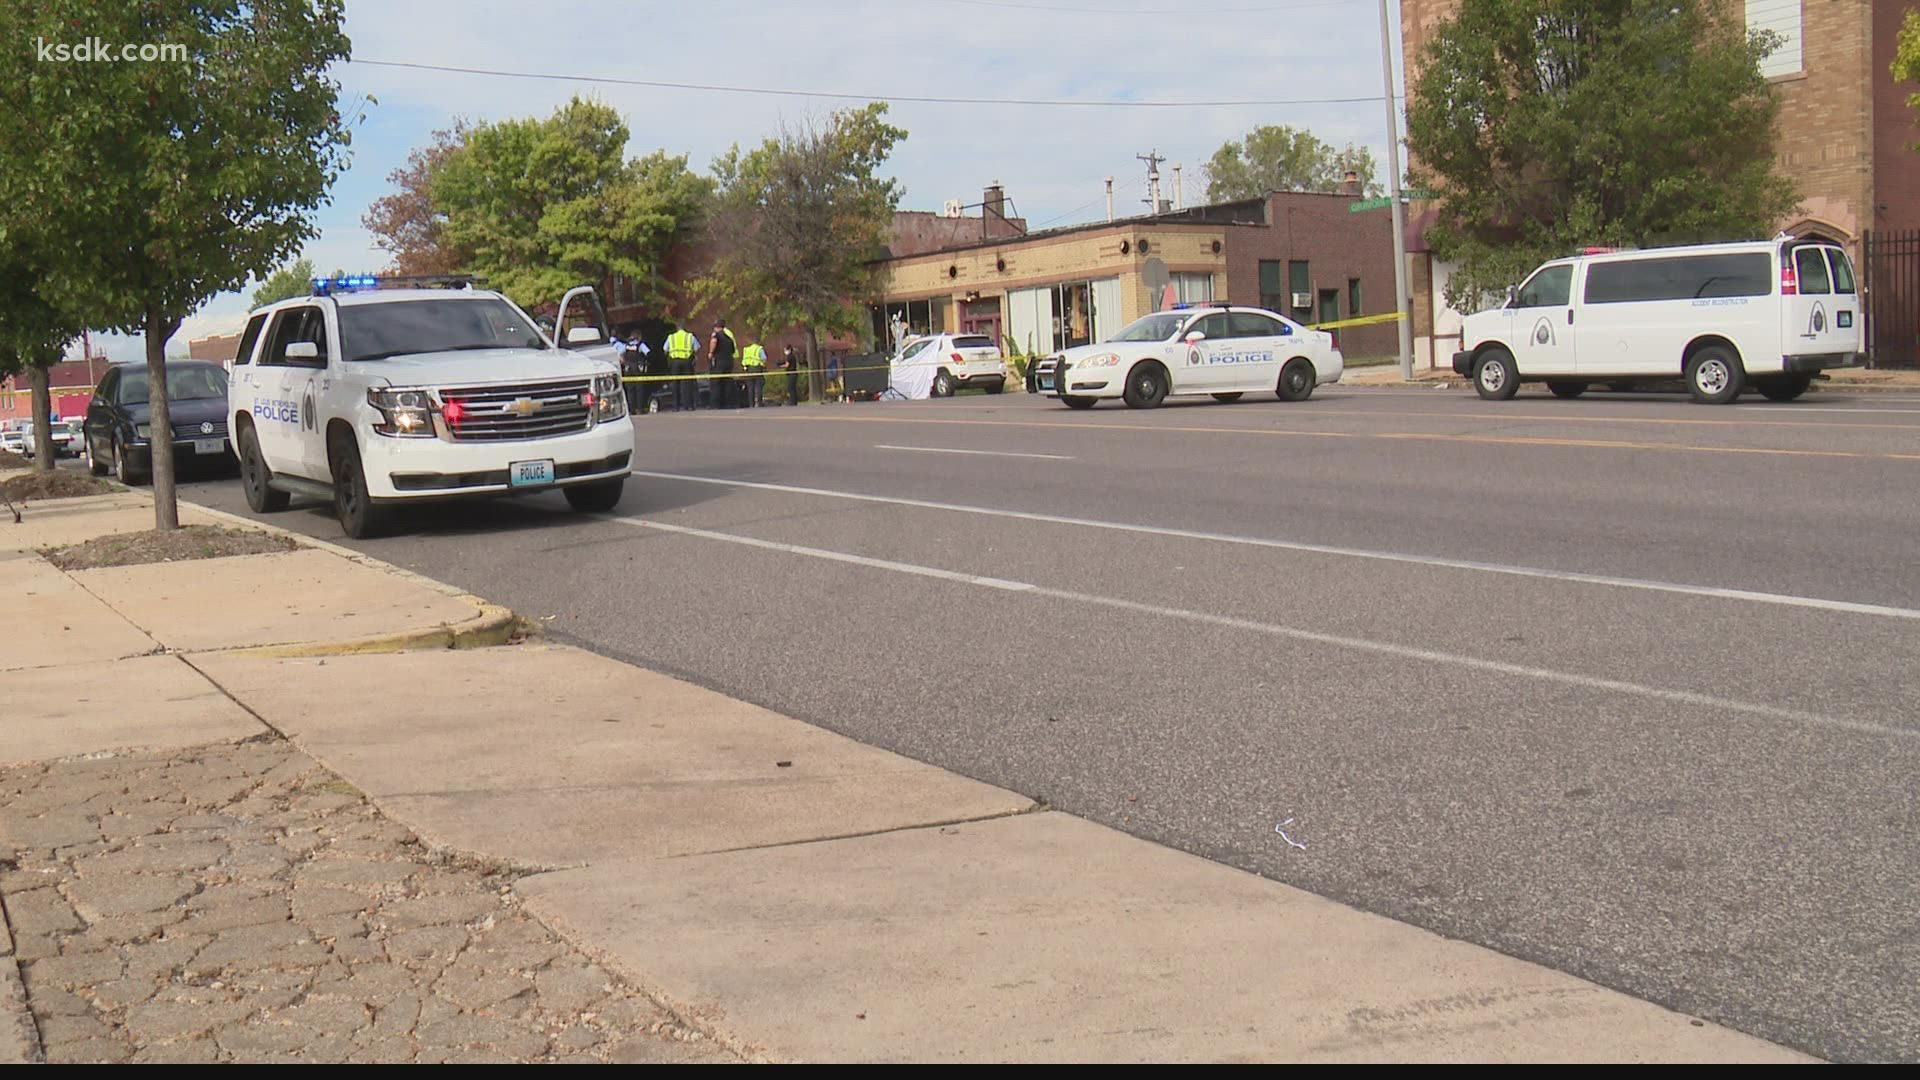 A person was hit and killed by a car that drove away from the scene in south St. Louis Thursday morning.